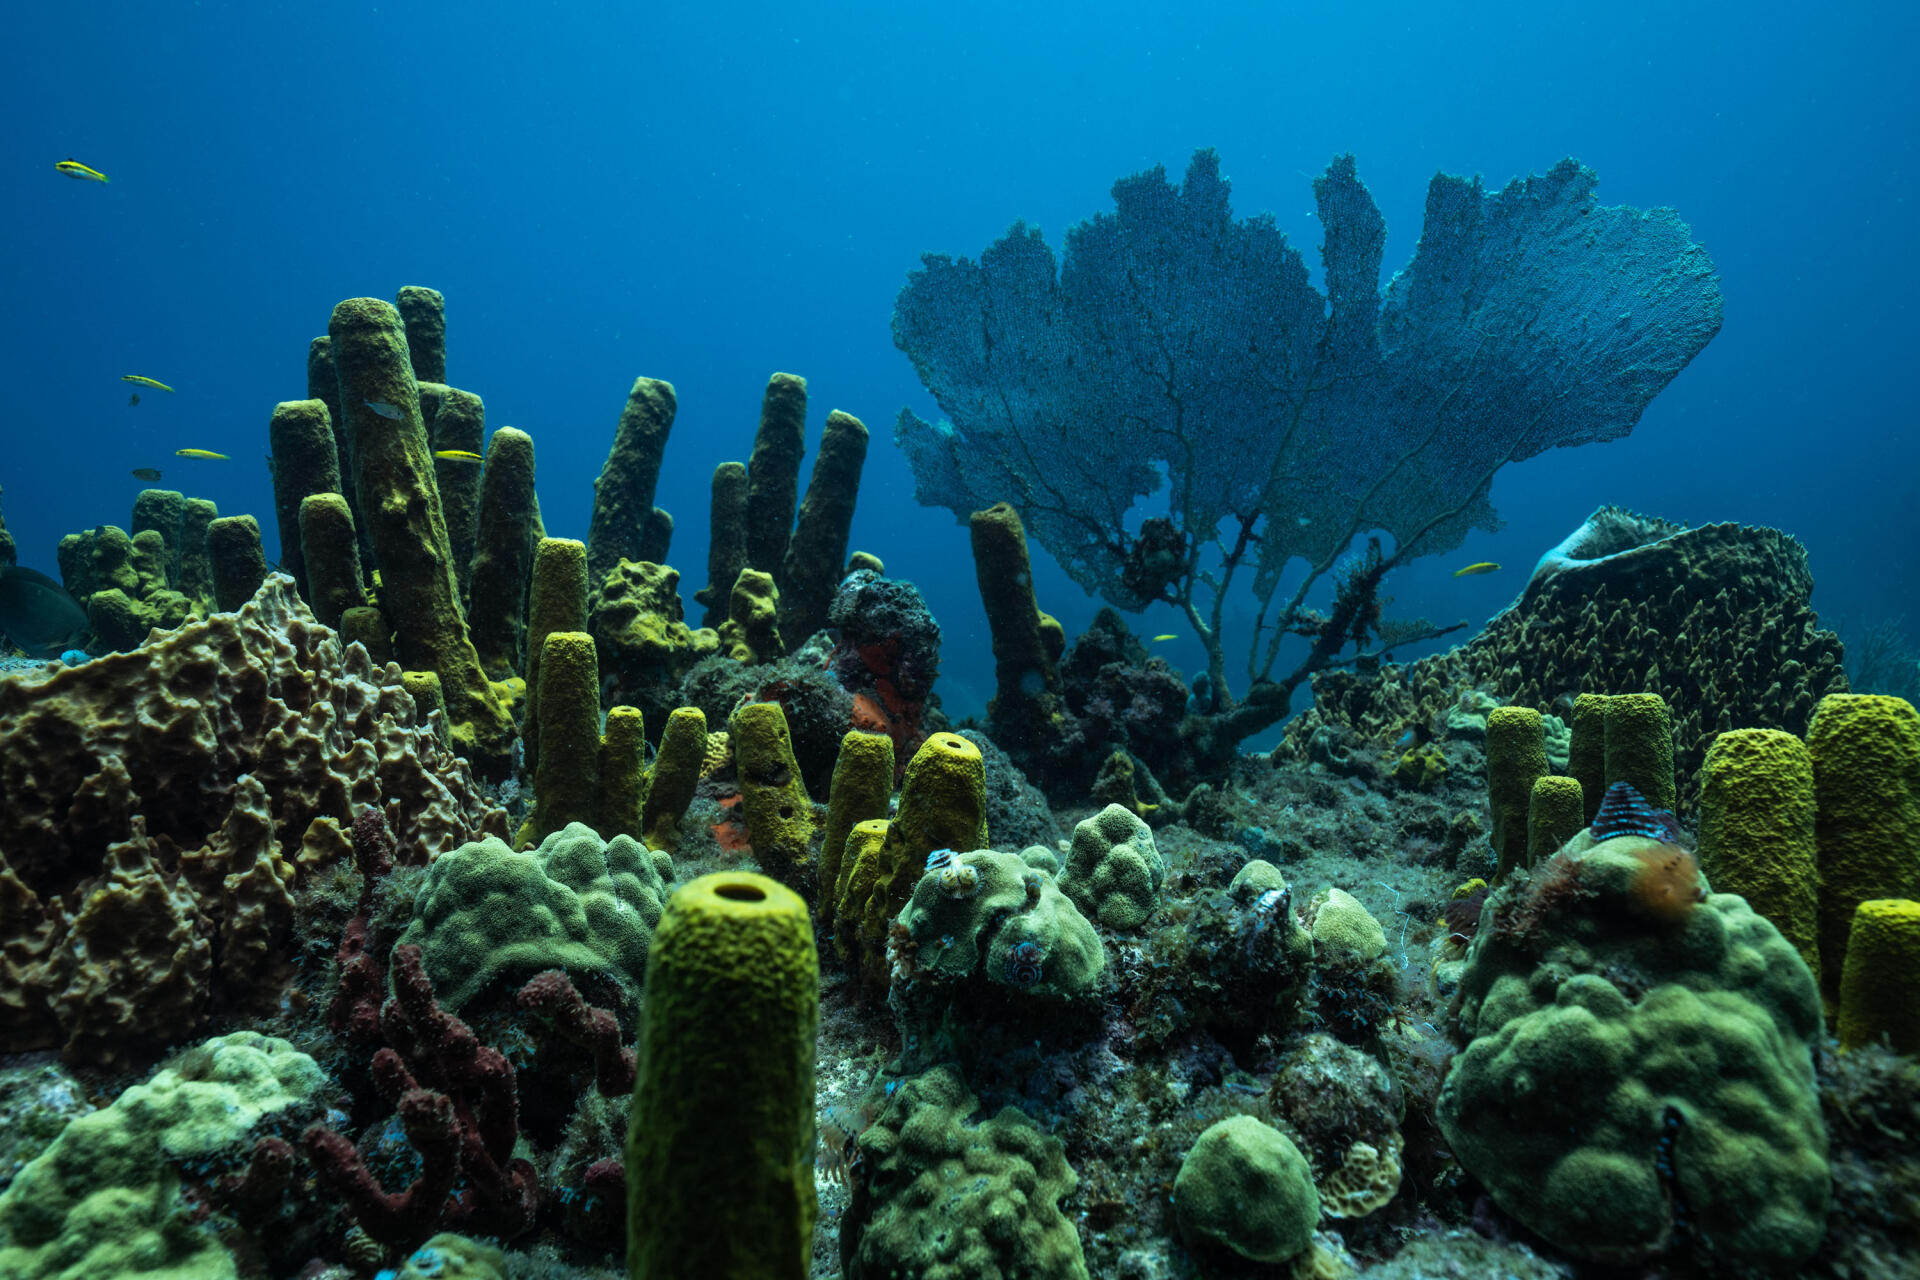 In the shallow waters of the dive sites, marine animal forests consist of gorgonians, sponges, and corals, and are home to many species.  Under the Pole he considers these shallow areas as landmarks of his in-depth work.  In Guadeloupe, March 27, 2023.